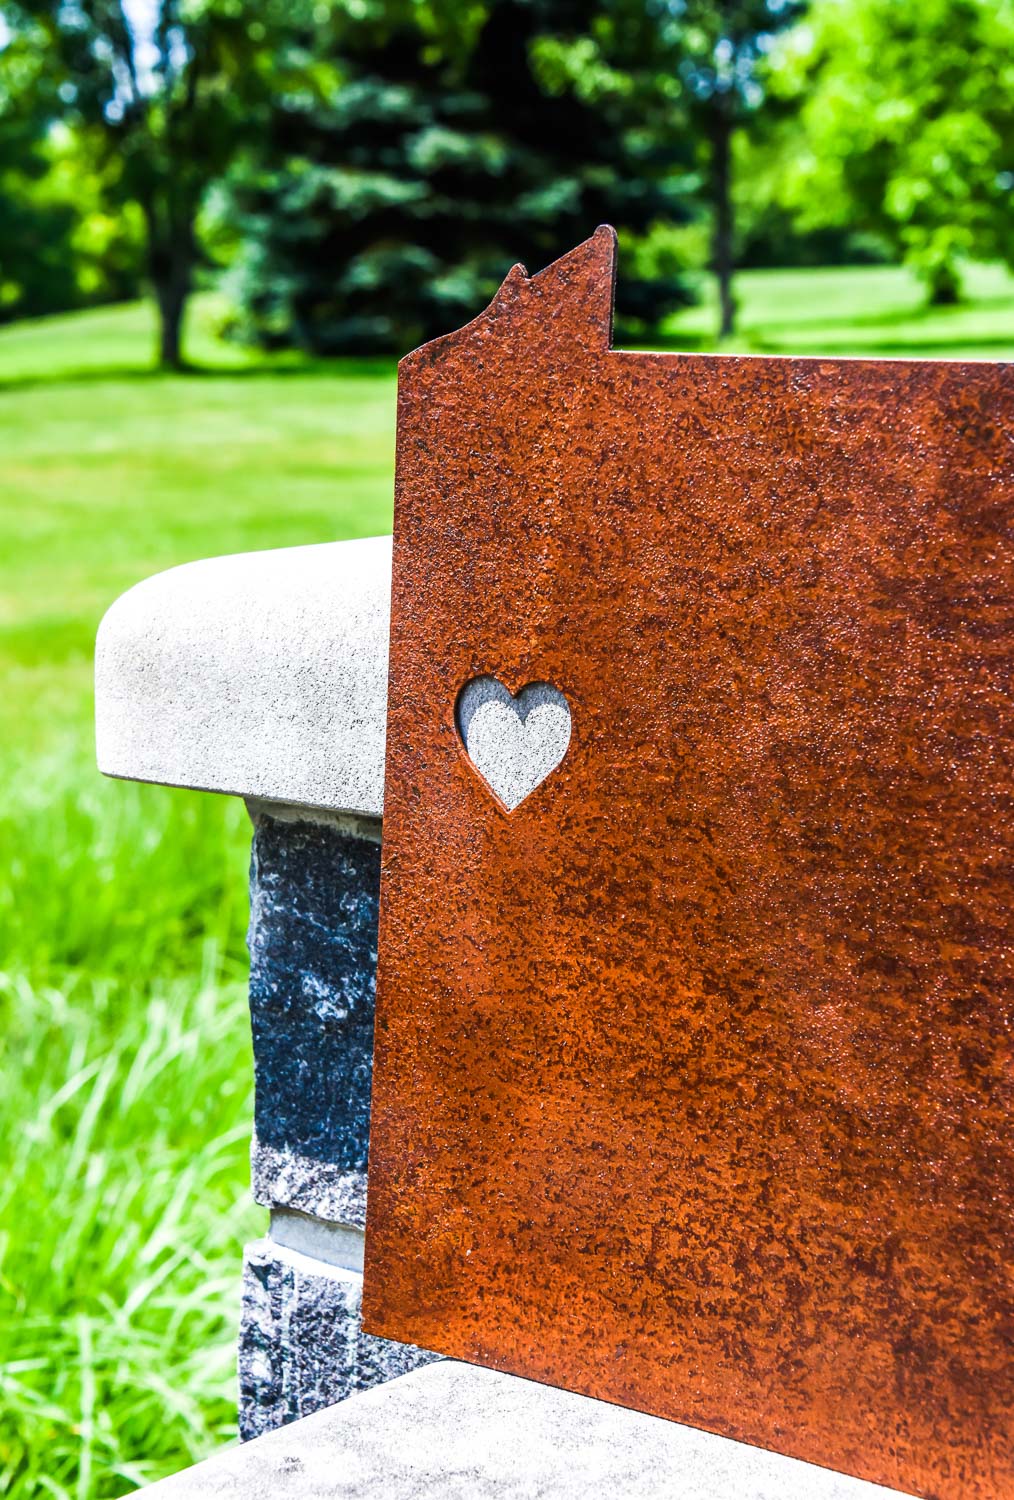 Rusted Metal Pennsylvania State with Heart Location Cutout 2.jpg